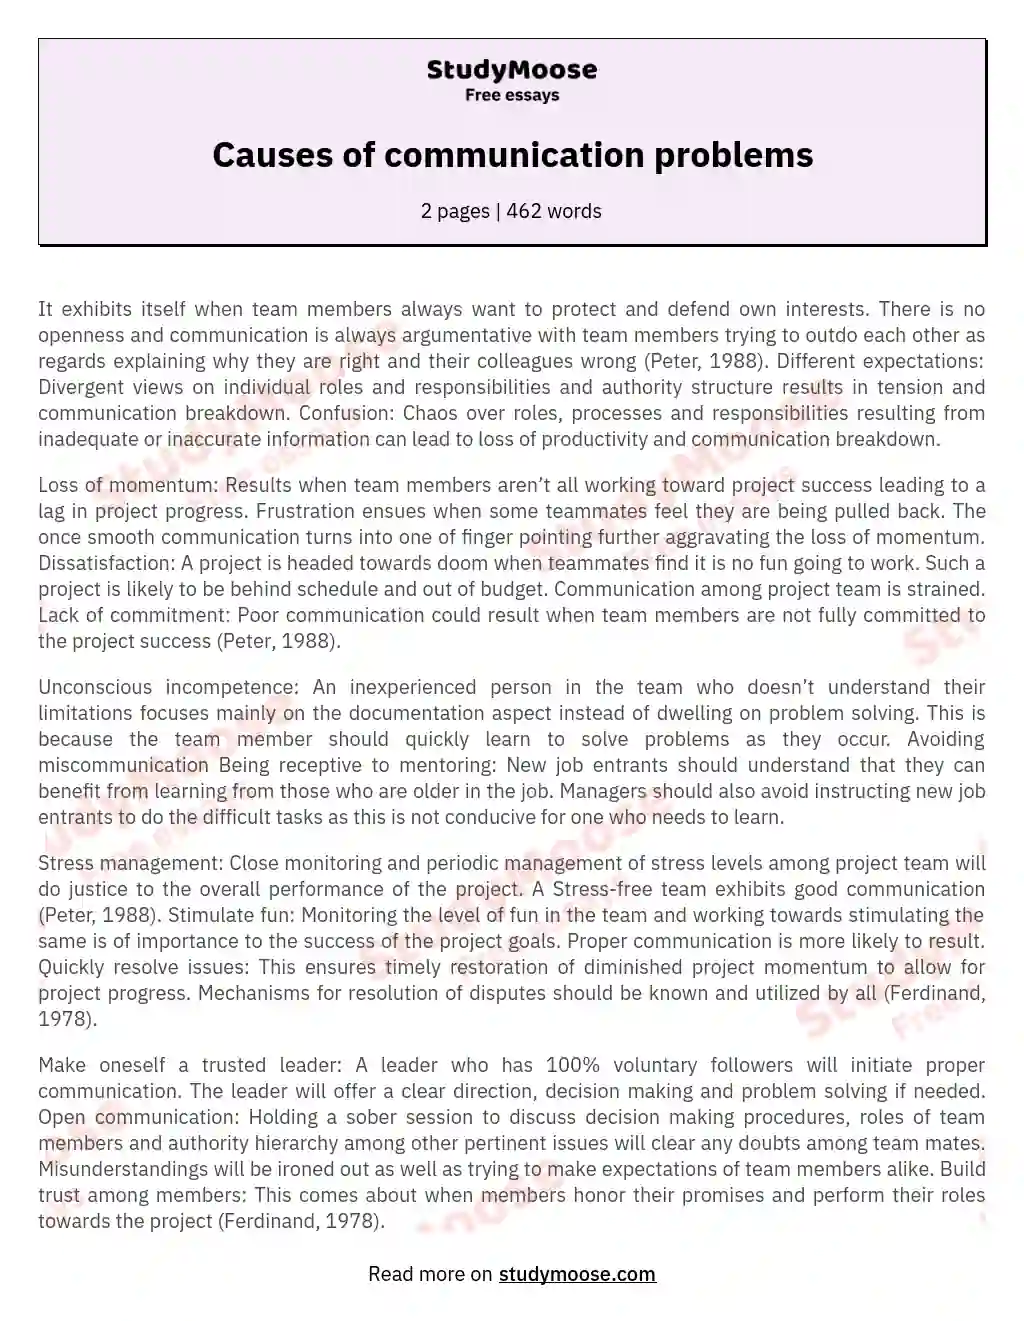 Causes of communication problems essay